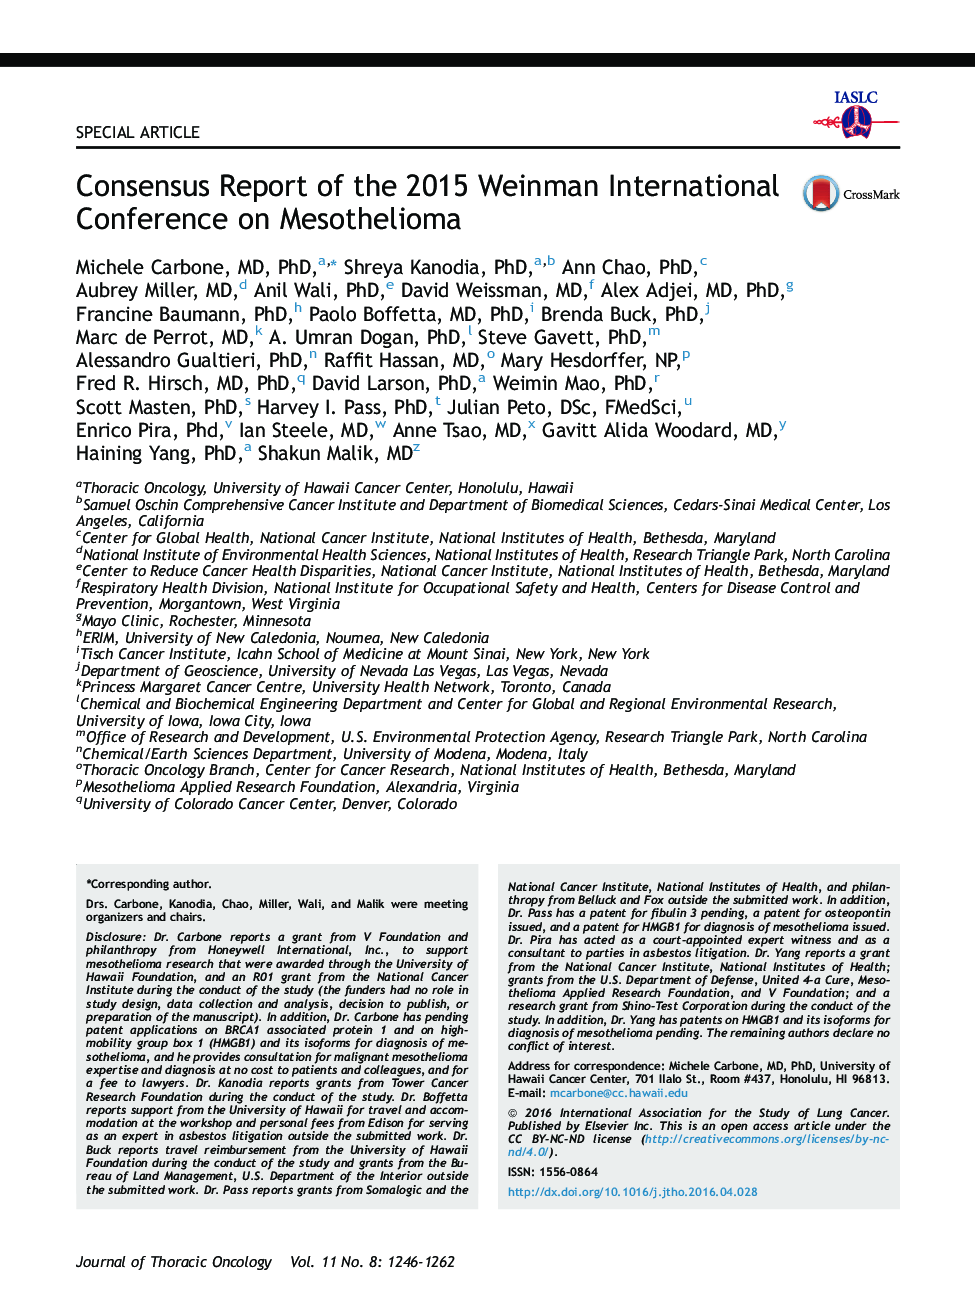 Consensus Report of the 2015 Weinman International Conference on Mesothelioma